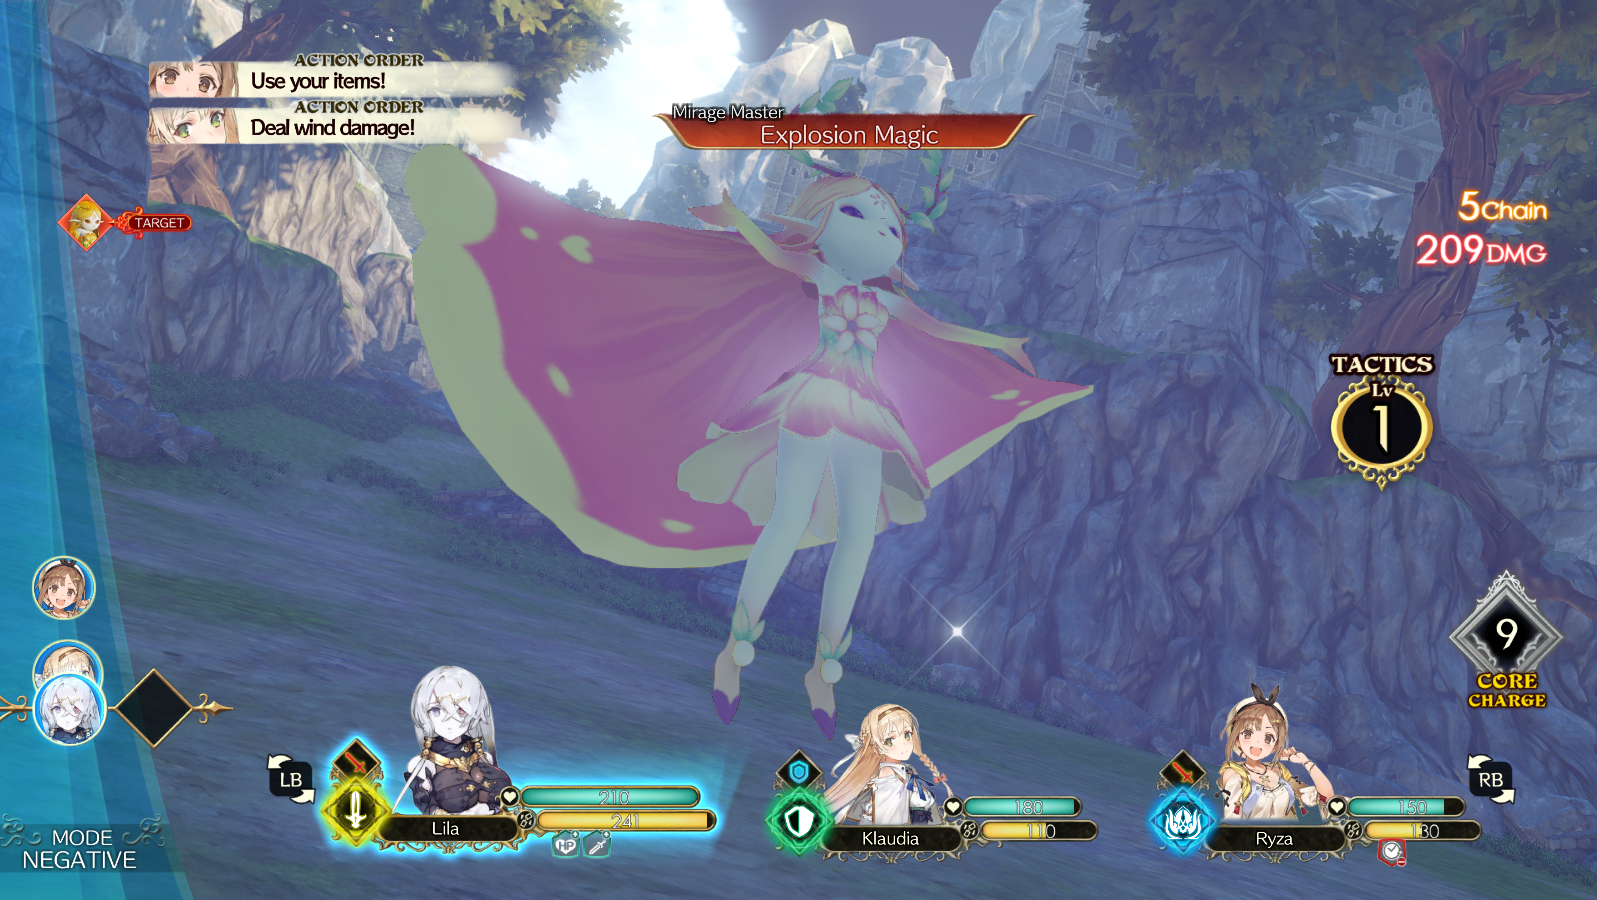 Mirage Master casting Explosion Magic, a damaging AoE spell | Atelier Ryza: Ever Darkness & the Secret Hideout